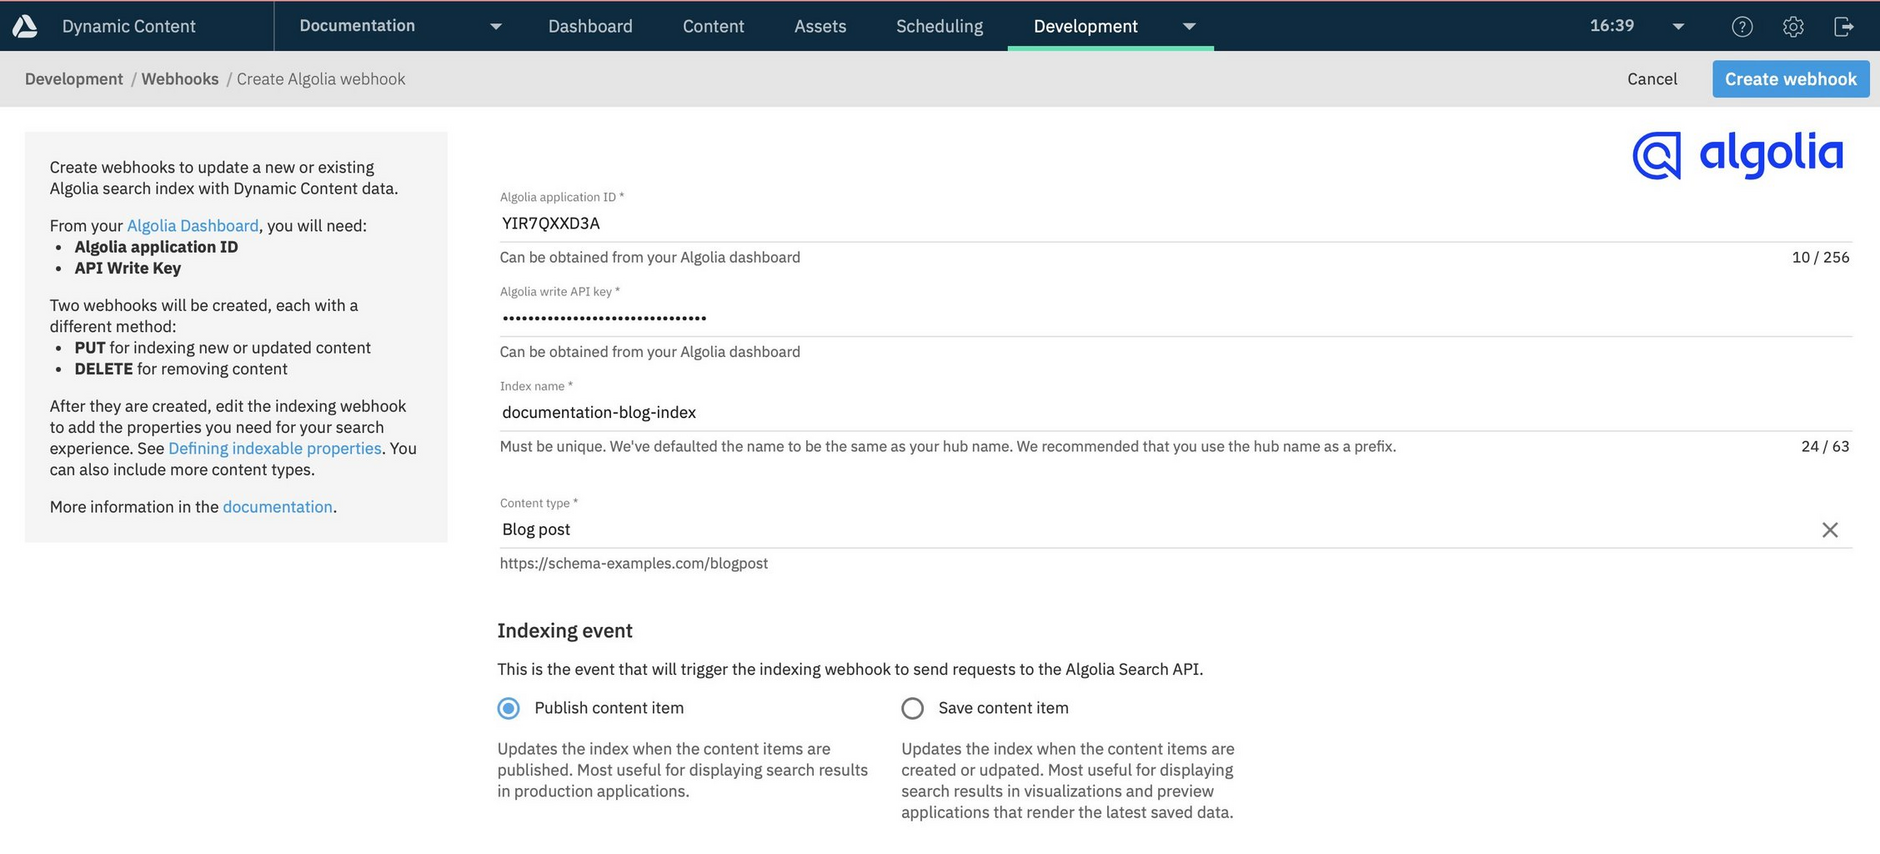 From the Create Algolia webhook dialog you provide information about your Algolia index, what content to index and how the webhook should be triggered to update the index